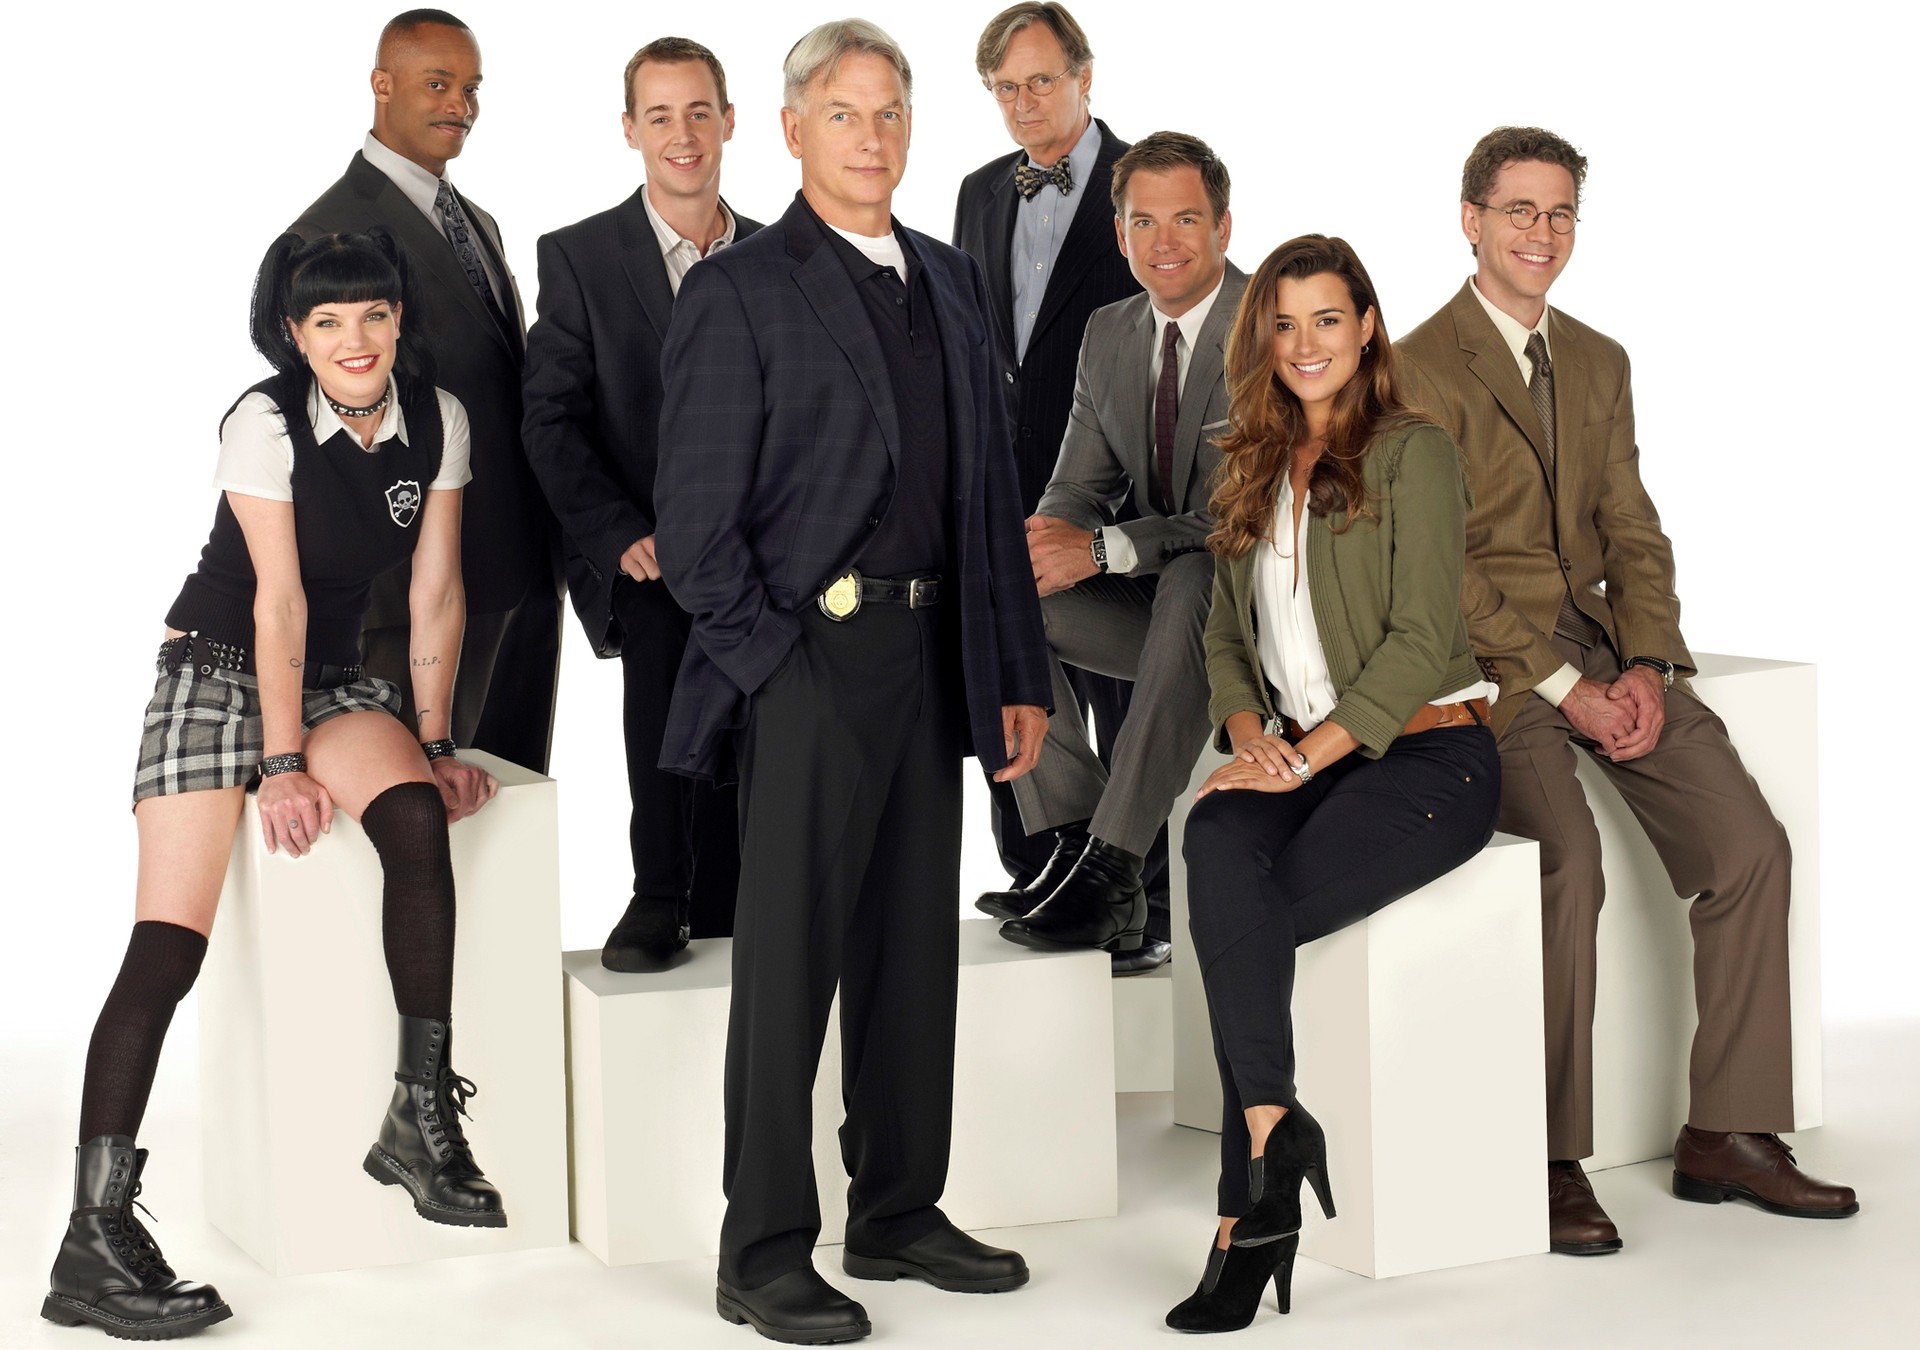 1920x1350 HD Wallpaper and background photos of NCIS Wallpaper for fans of NCIS  images.